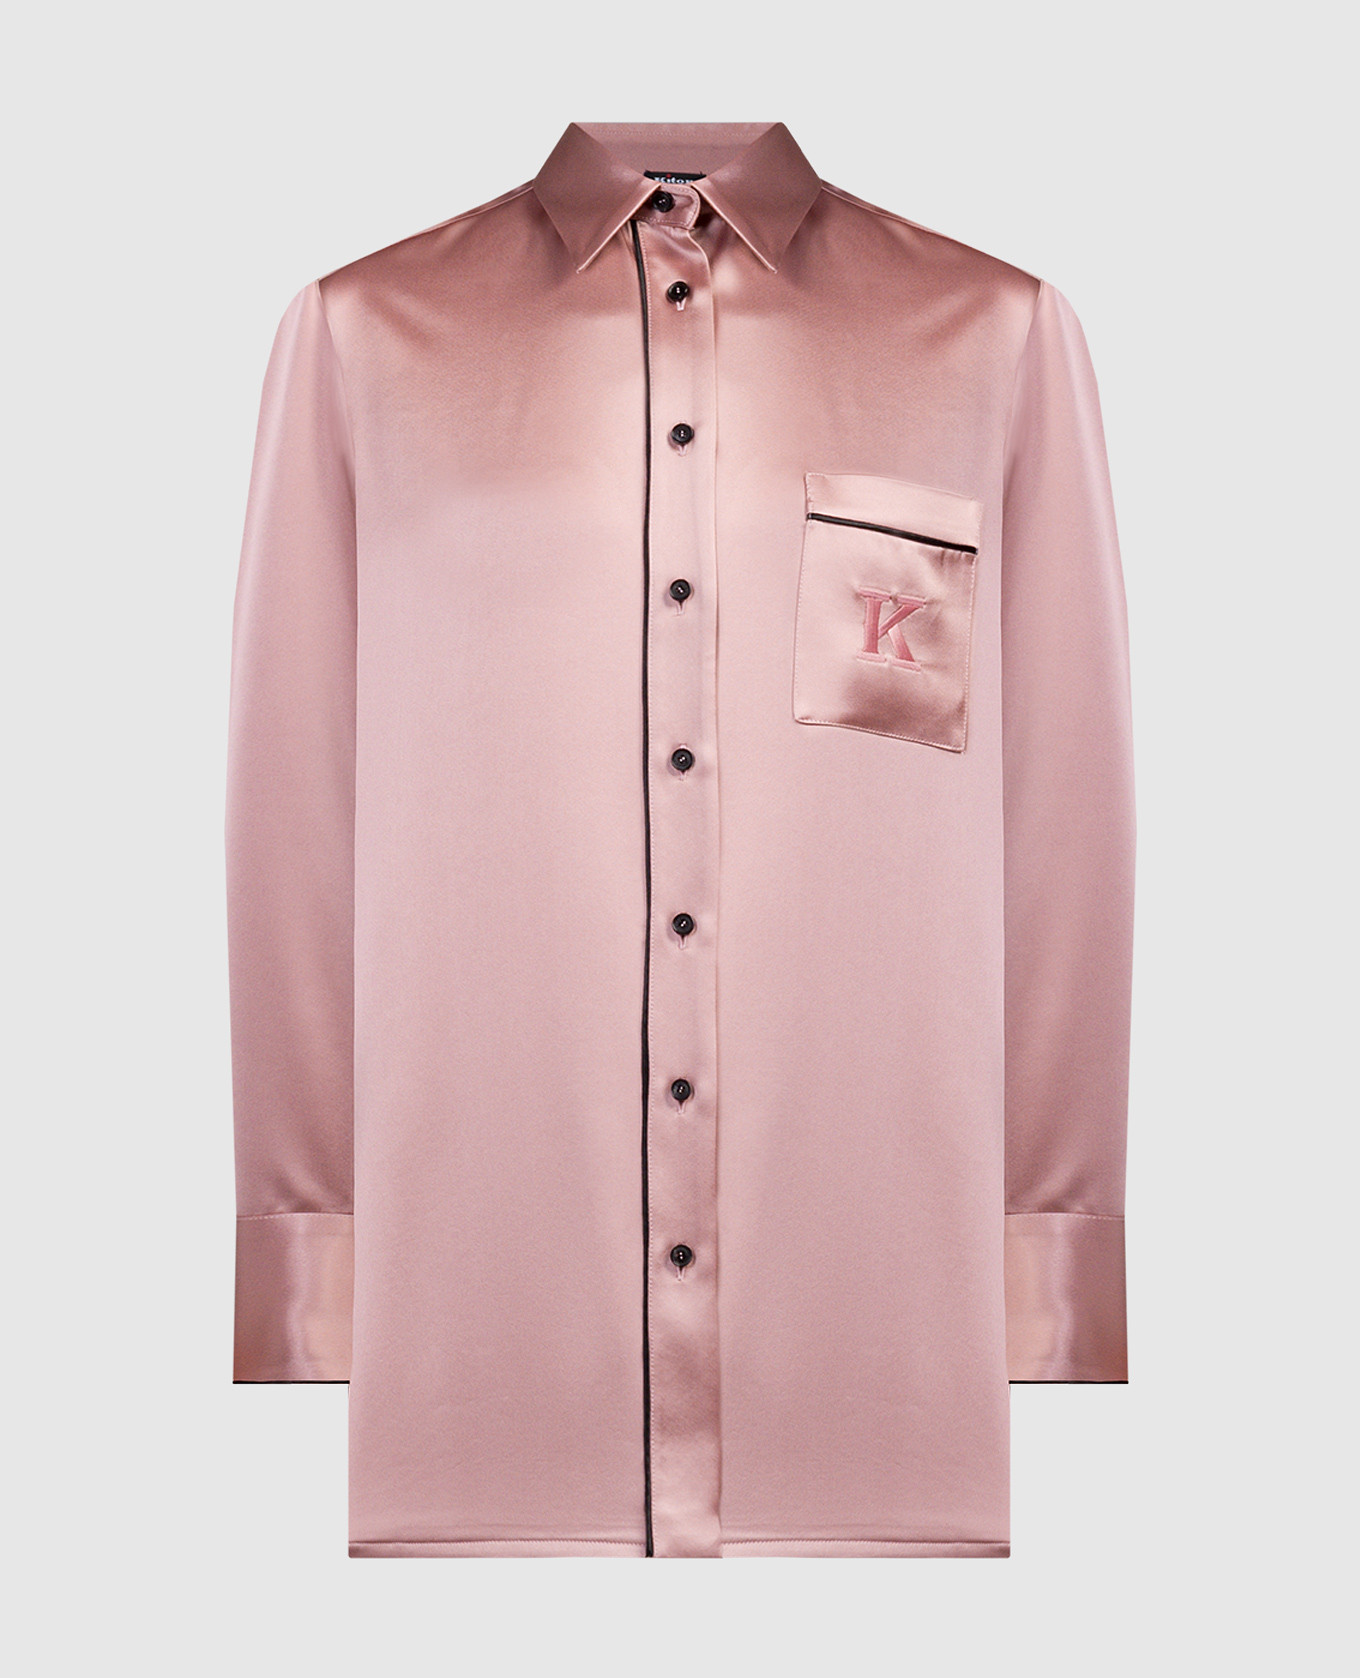 Pink blouse with logo embroidery